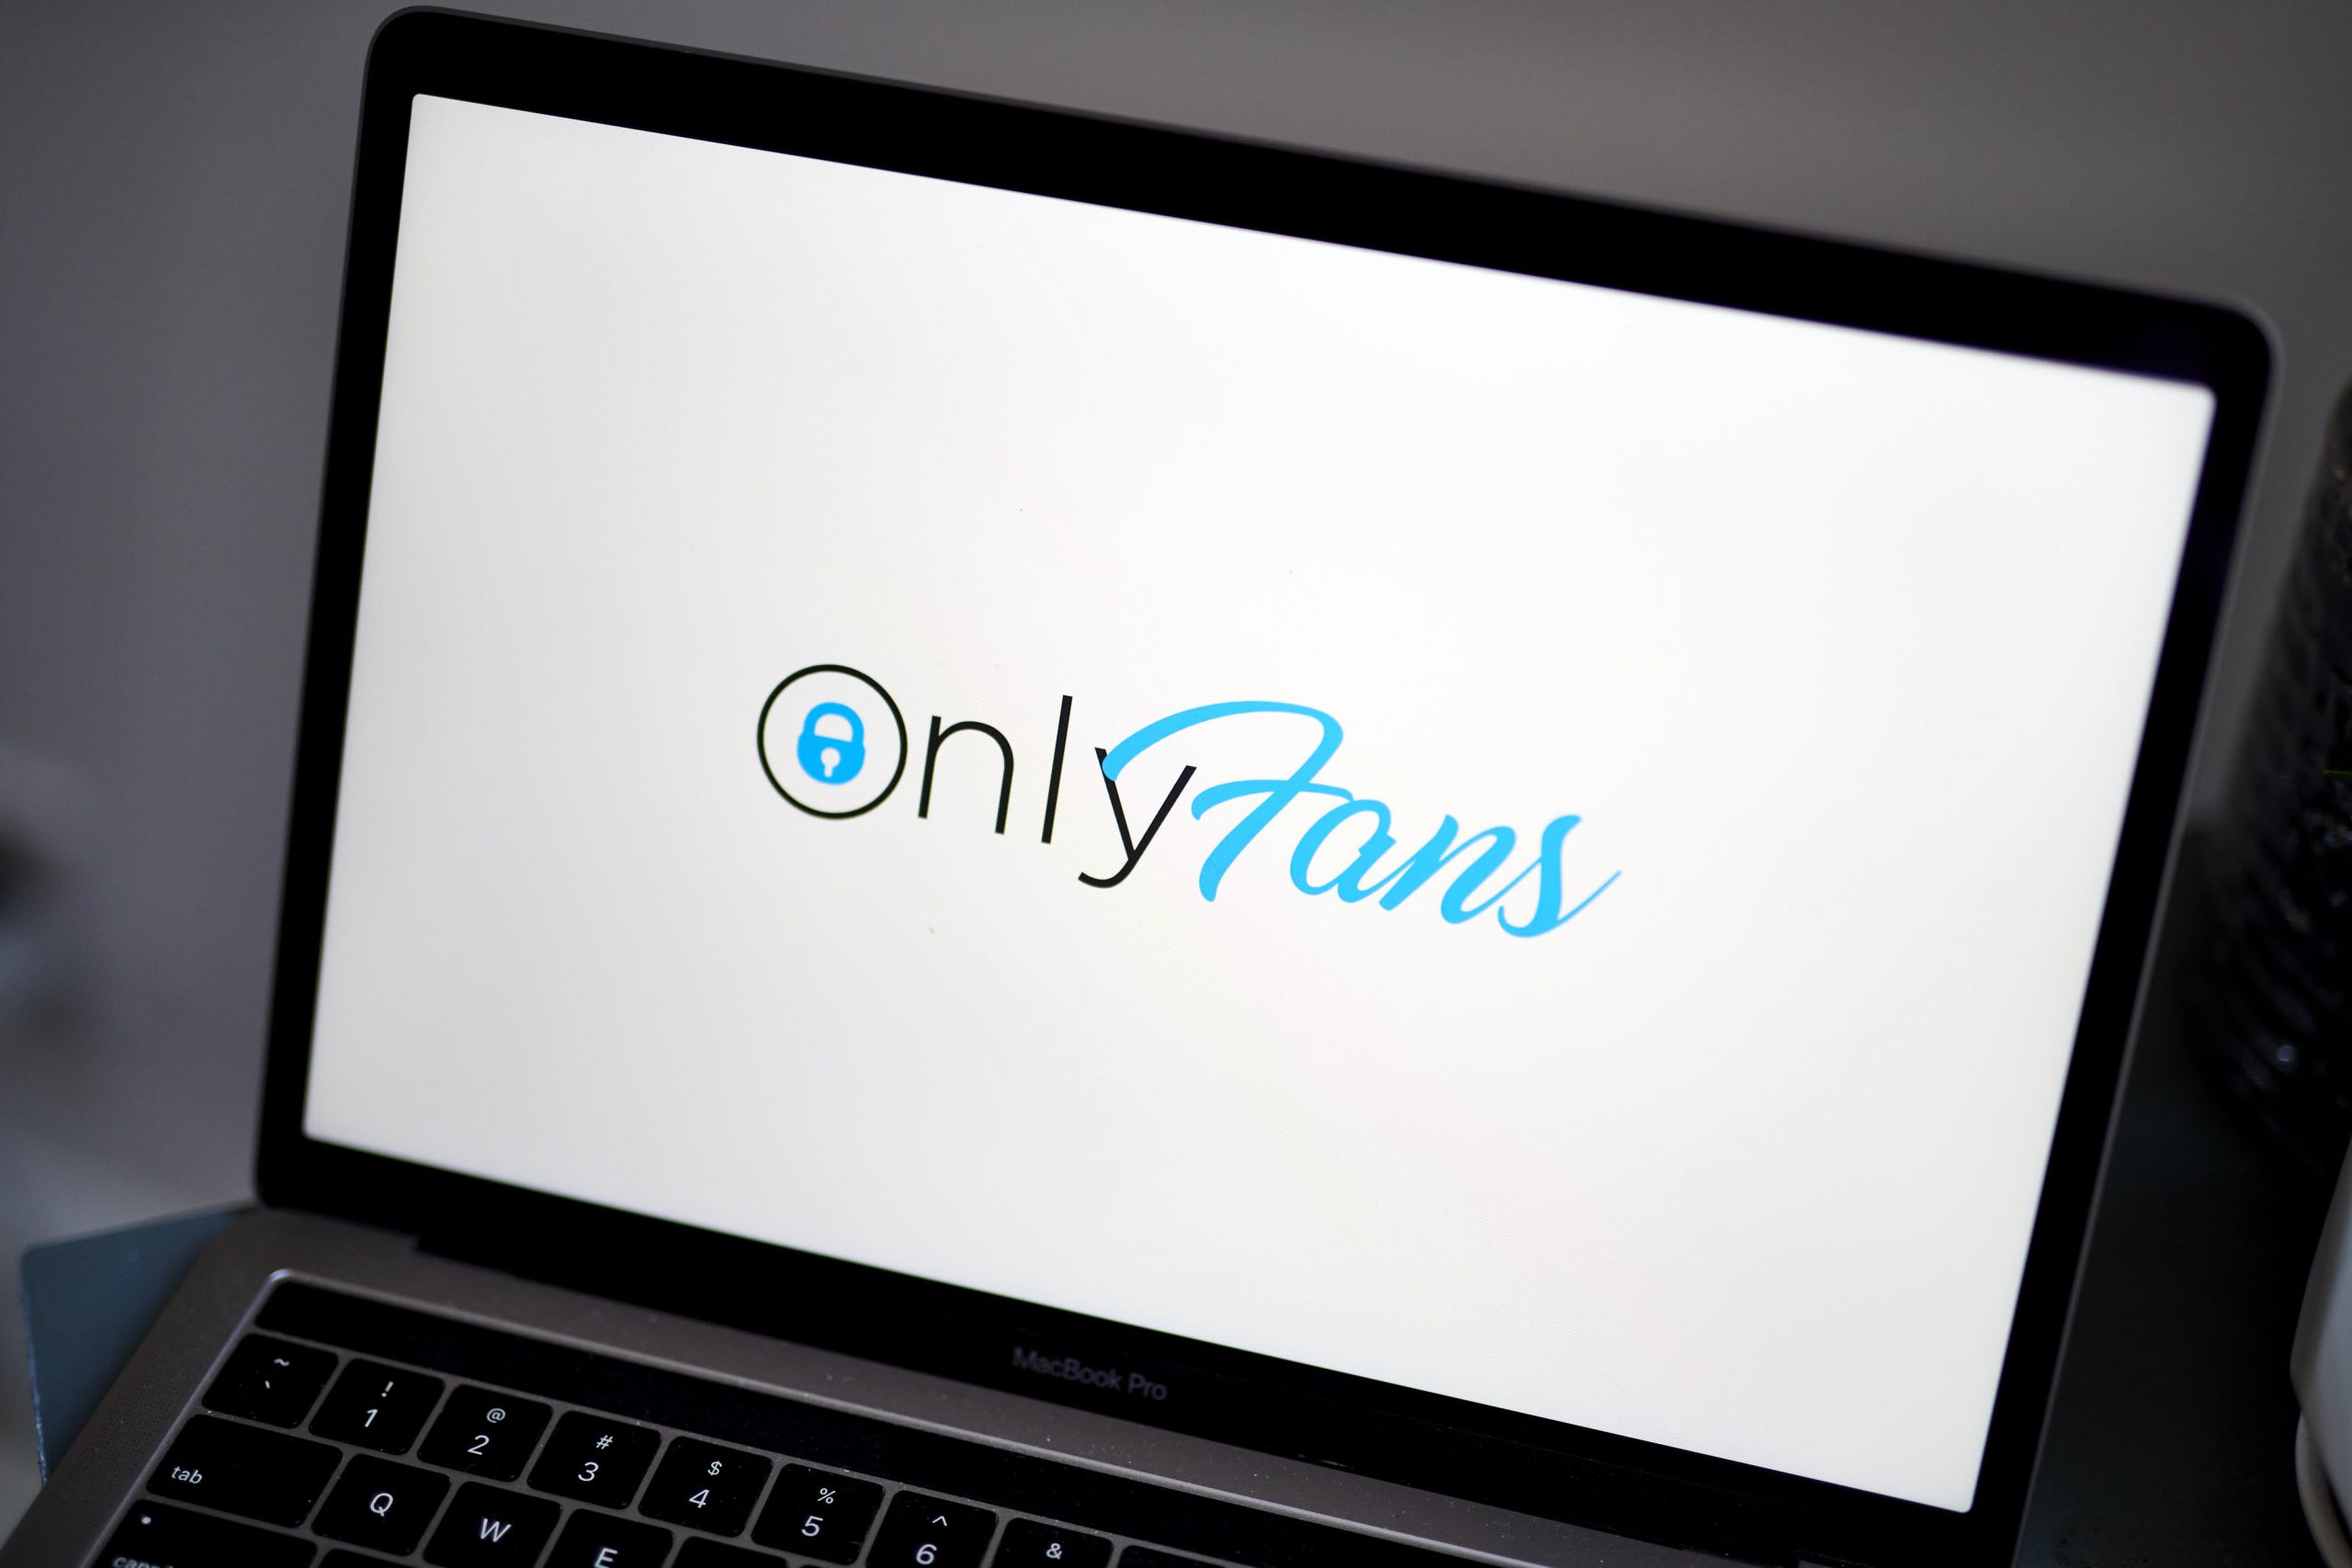 Porn made OnlyFans a powerhouse. Now it's banning sexual content after pressure from banks